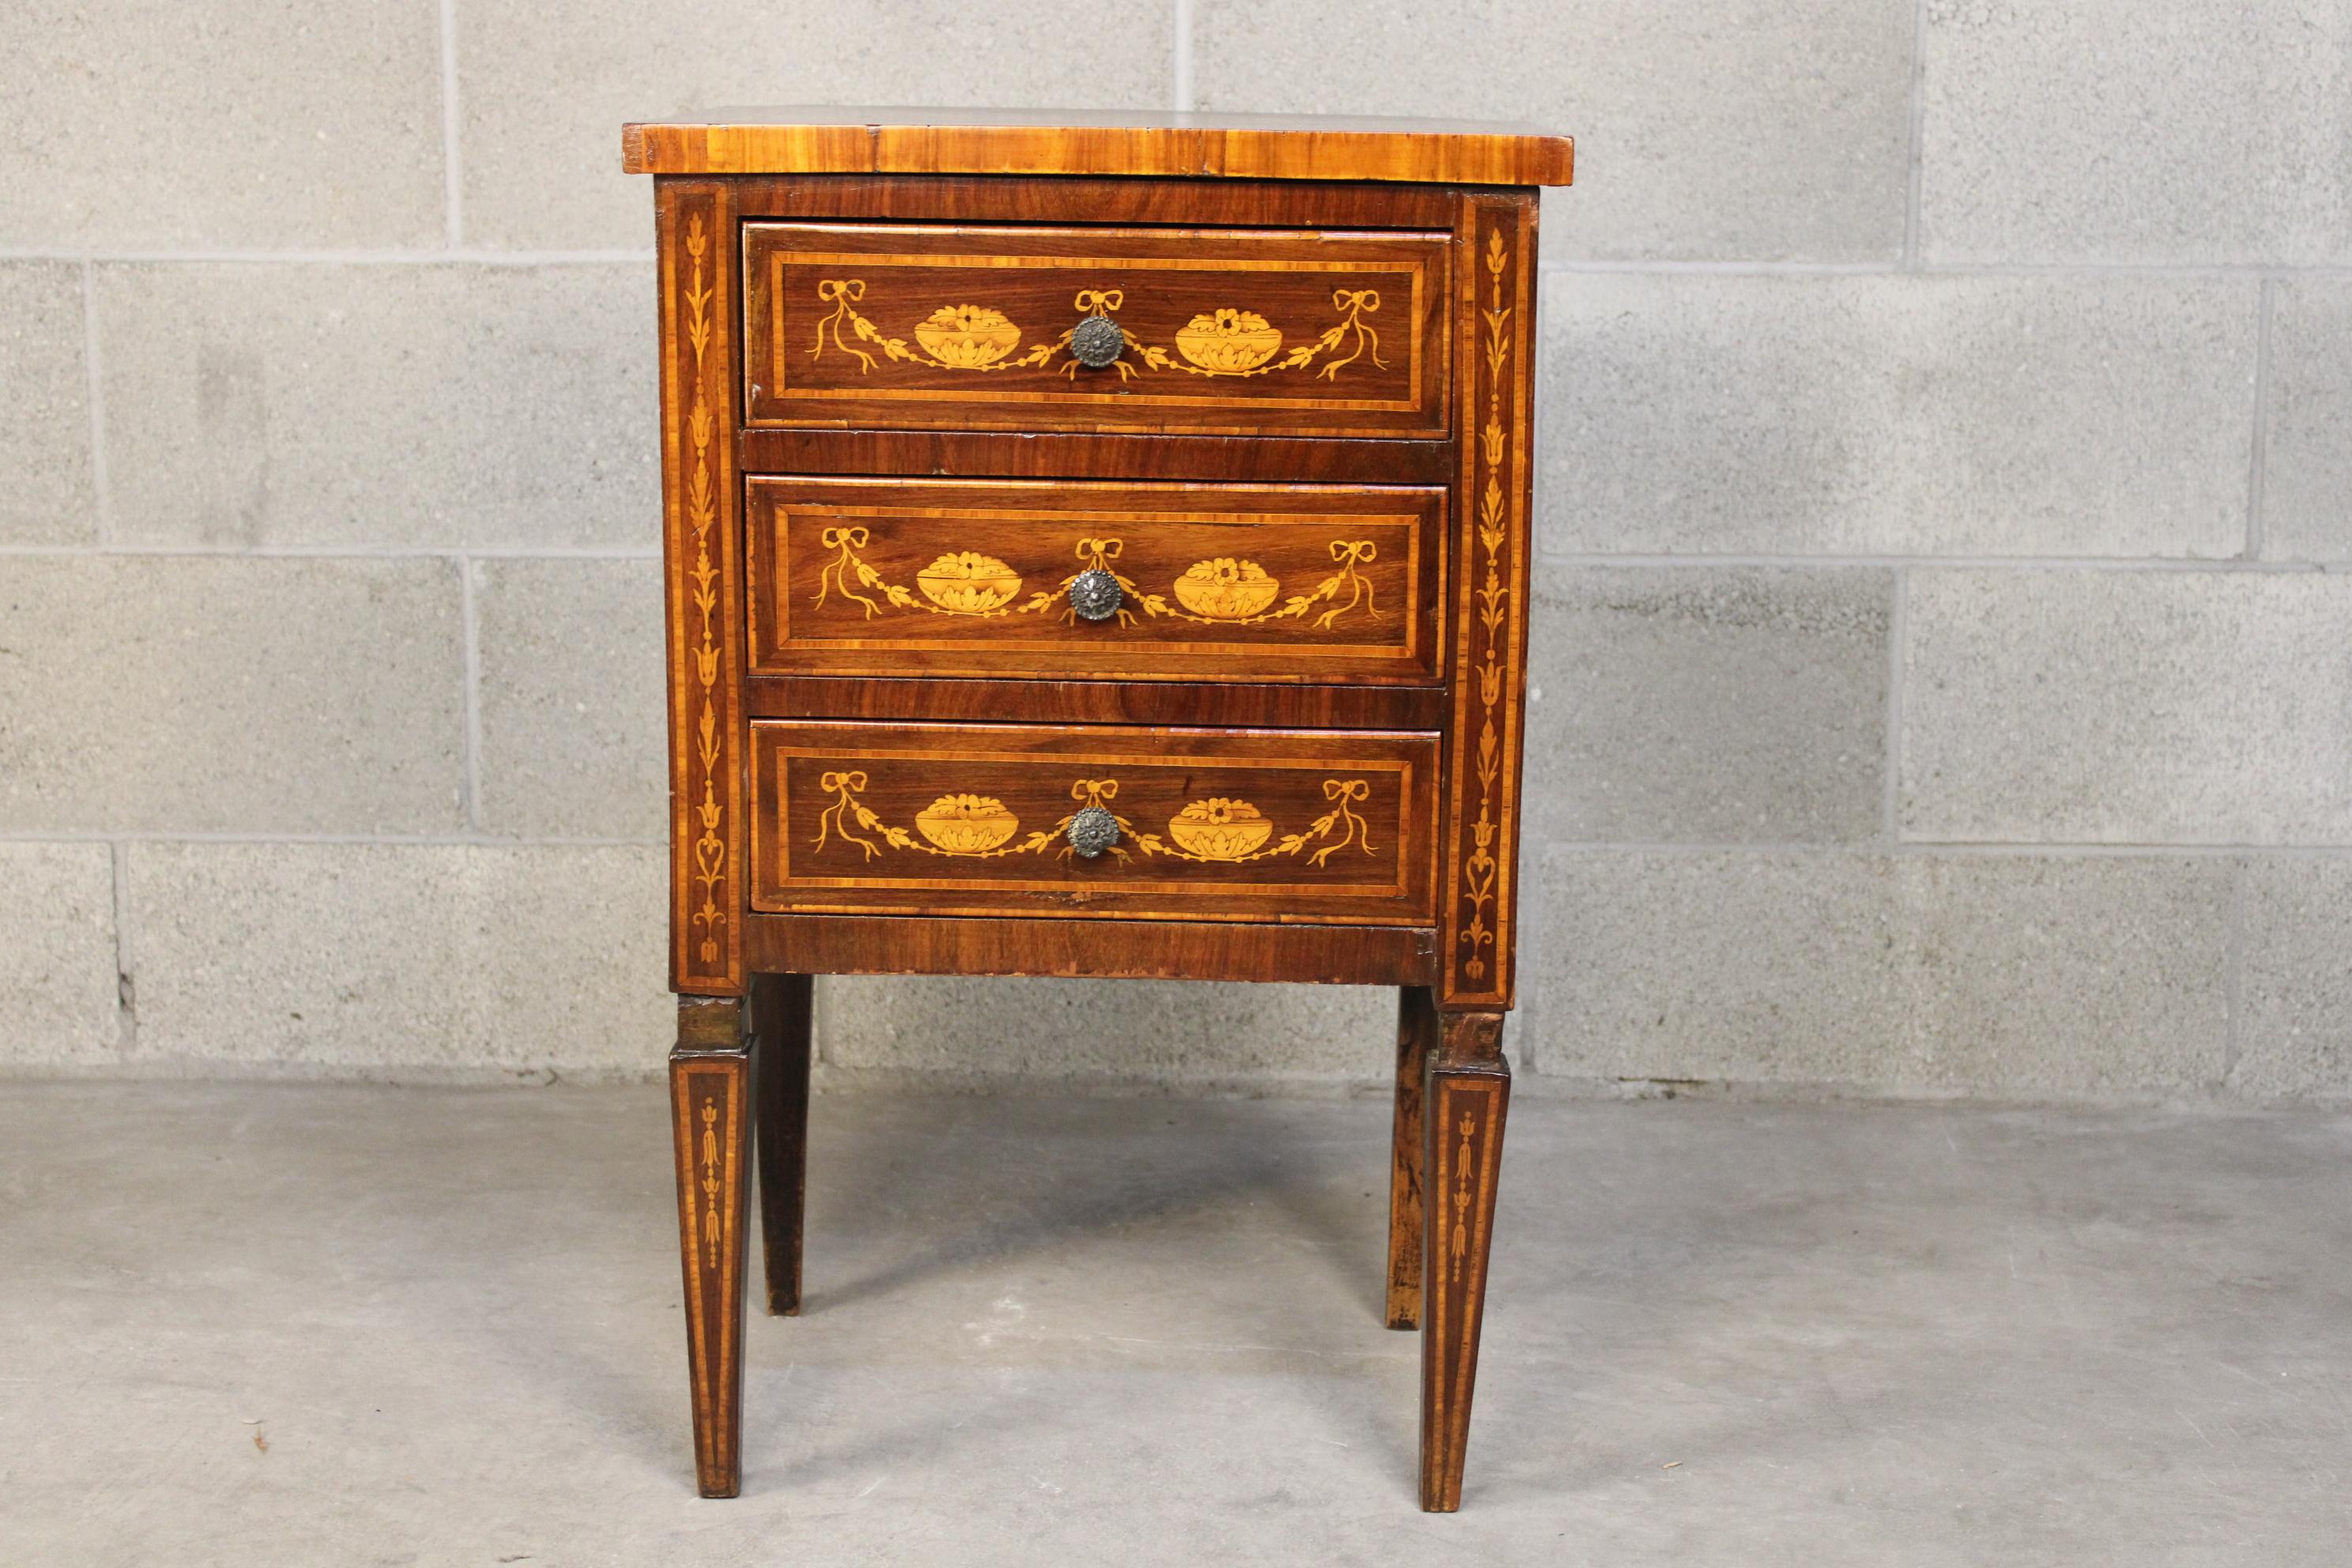 Very elegant and particular 19th century commode in style of Louis XVI about 1880 France. Has been restored. In very good condition. Very rich of inlaid work surrounded all around the item.  container shipping is possible
Measures: width 35 cm